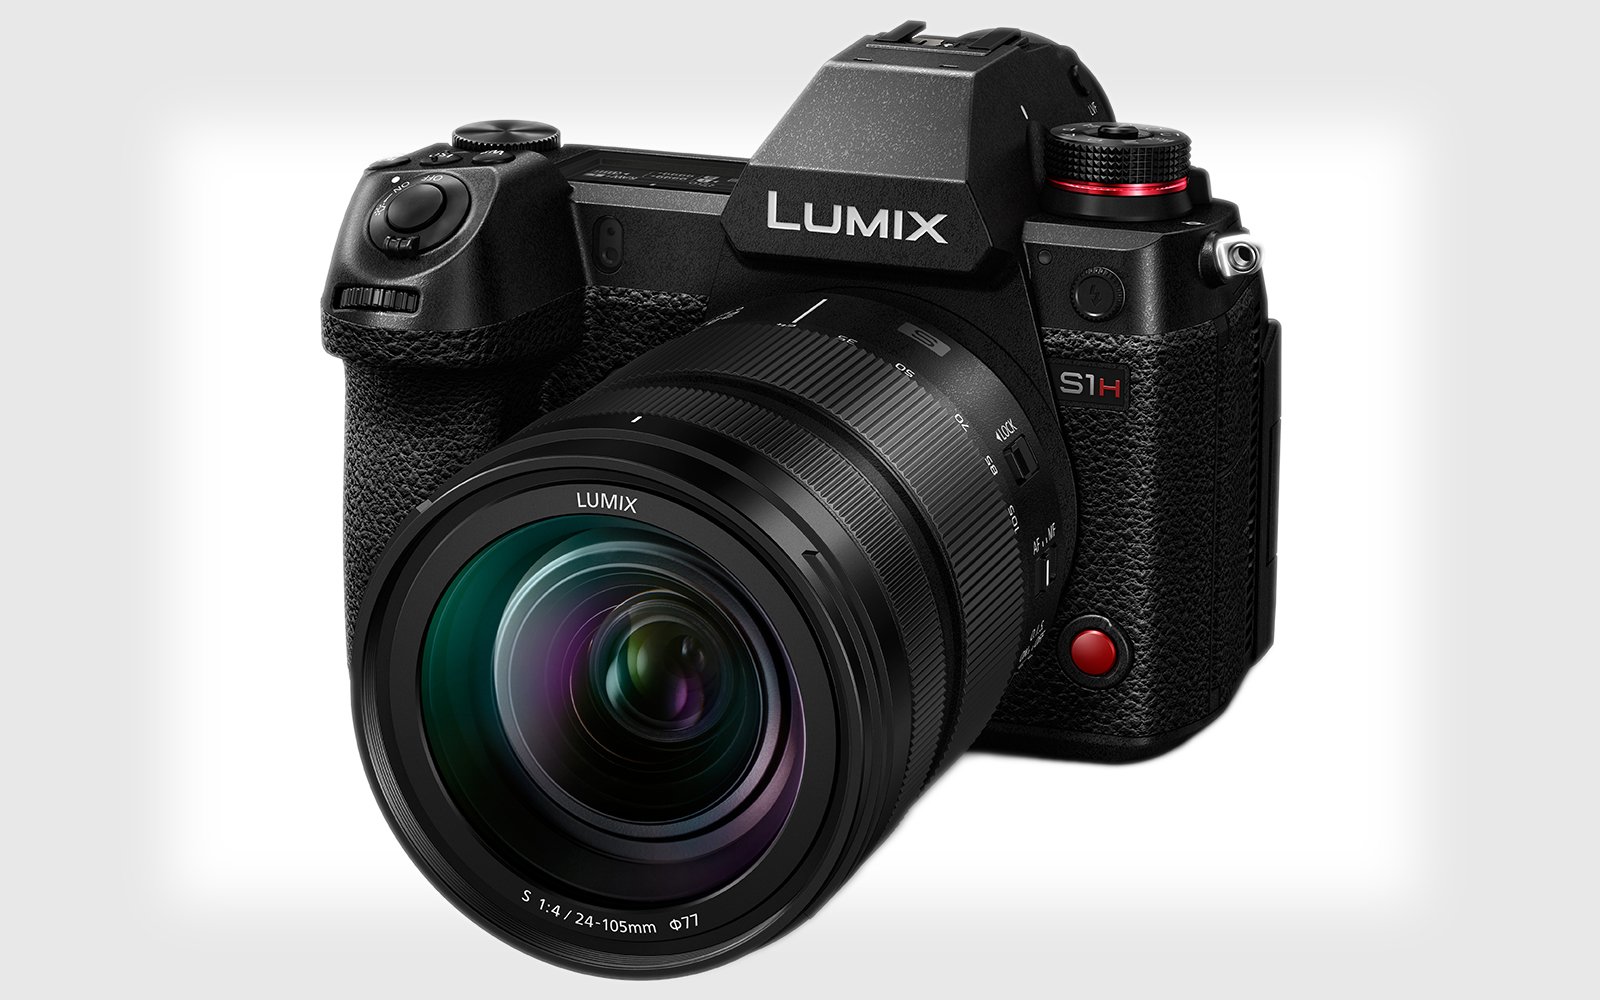 Panasonic Officially Unveils the Lumix S1H with 6K Video and Dual Native ISO